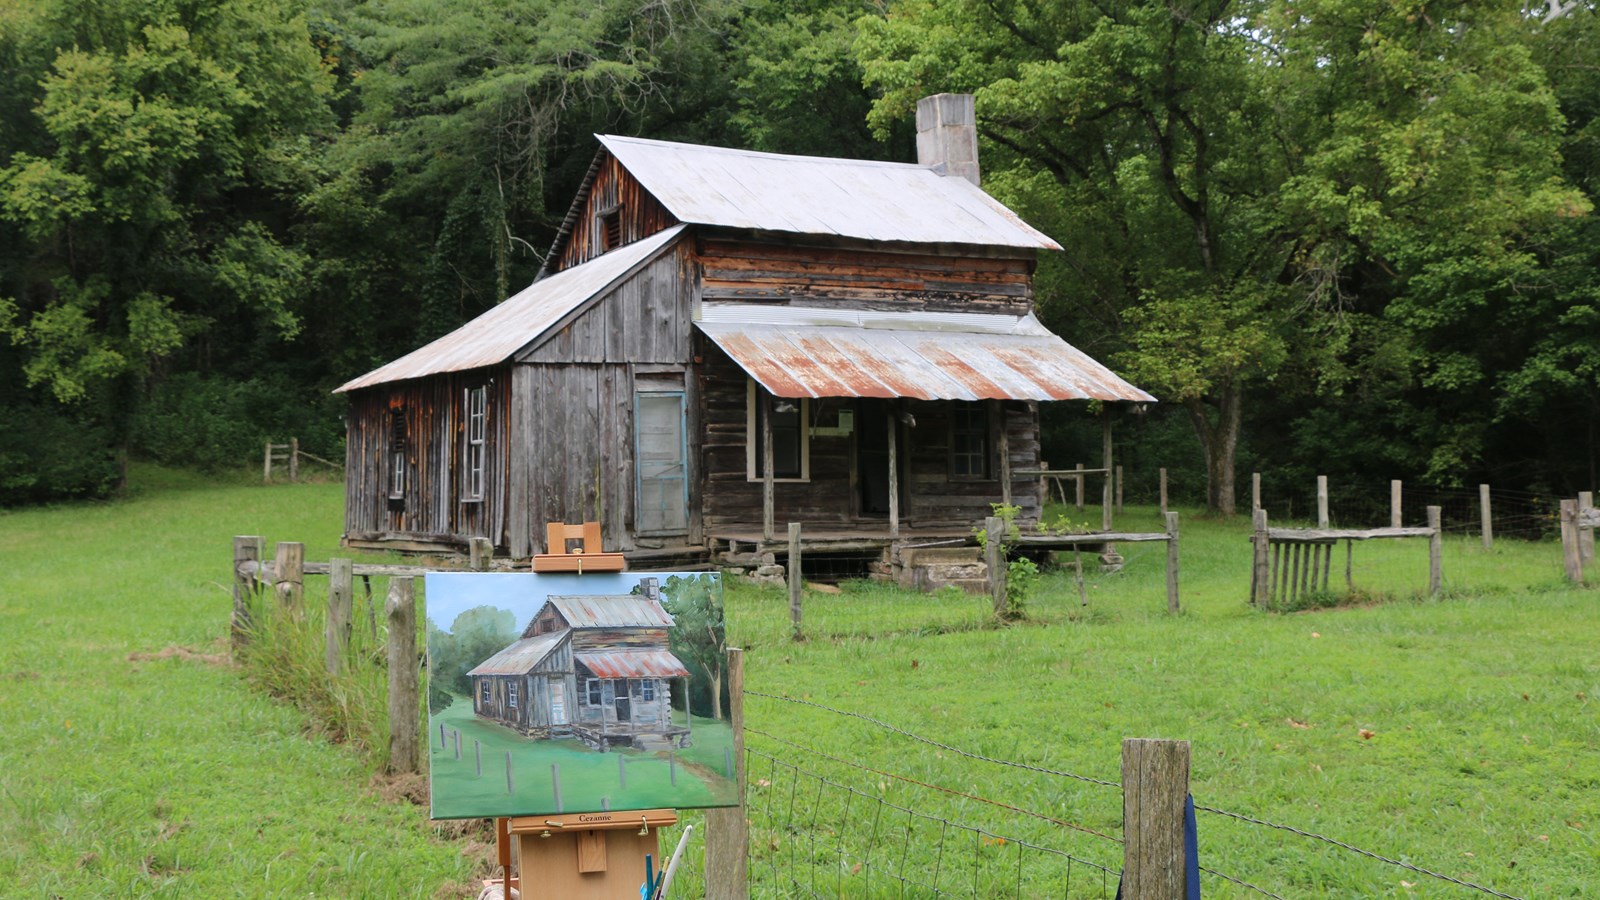 A plein air painting of a cabin sits on an easel in front of the cabin that inspired the painting.